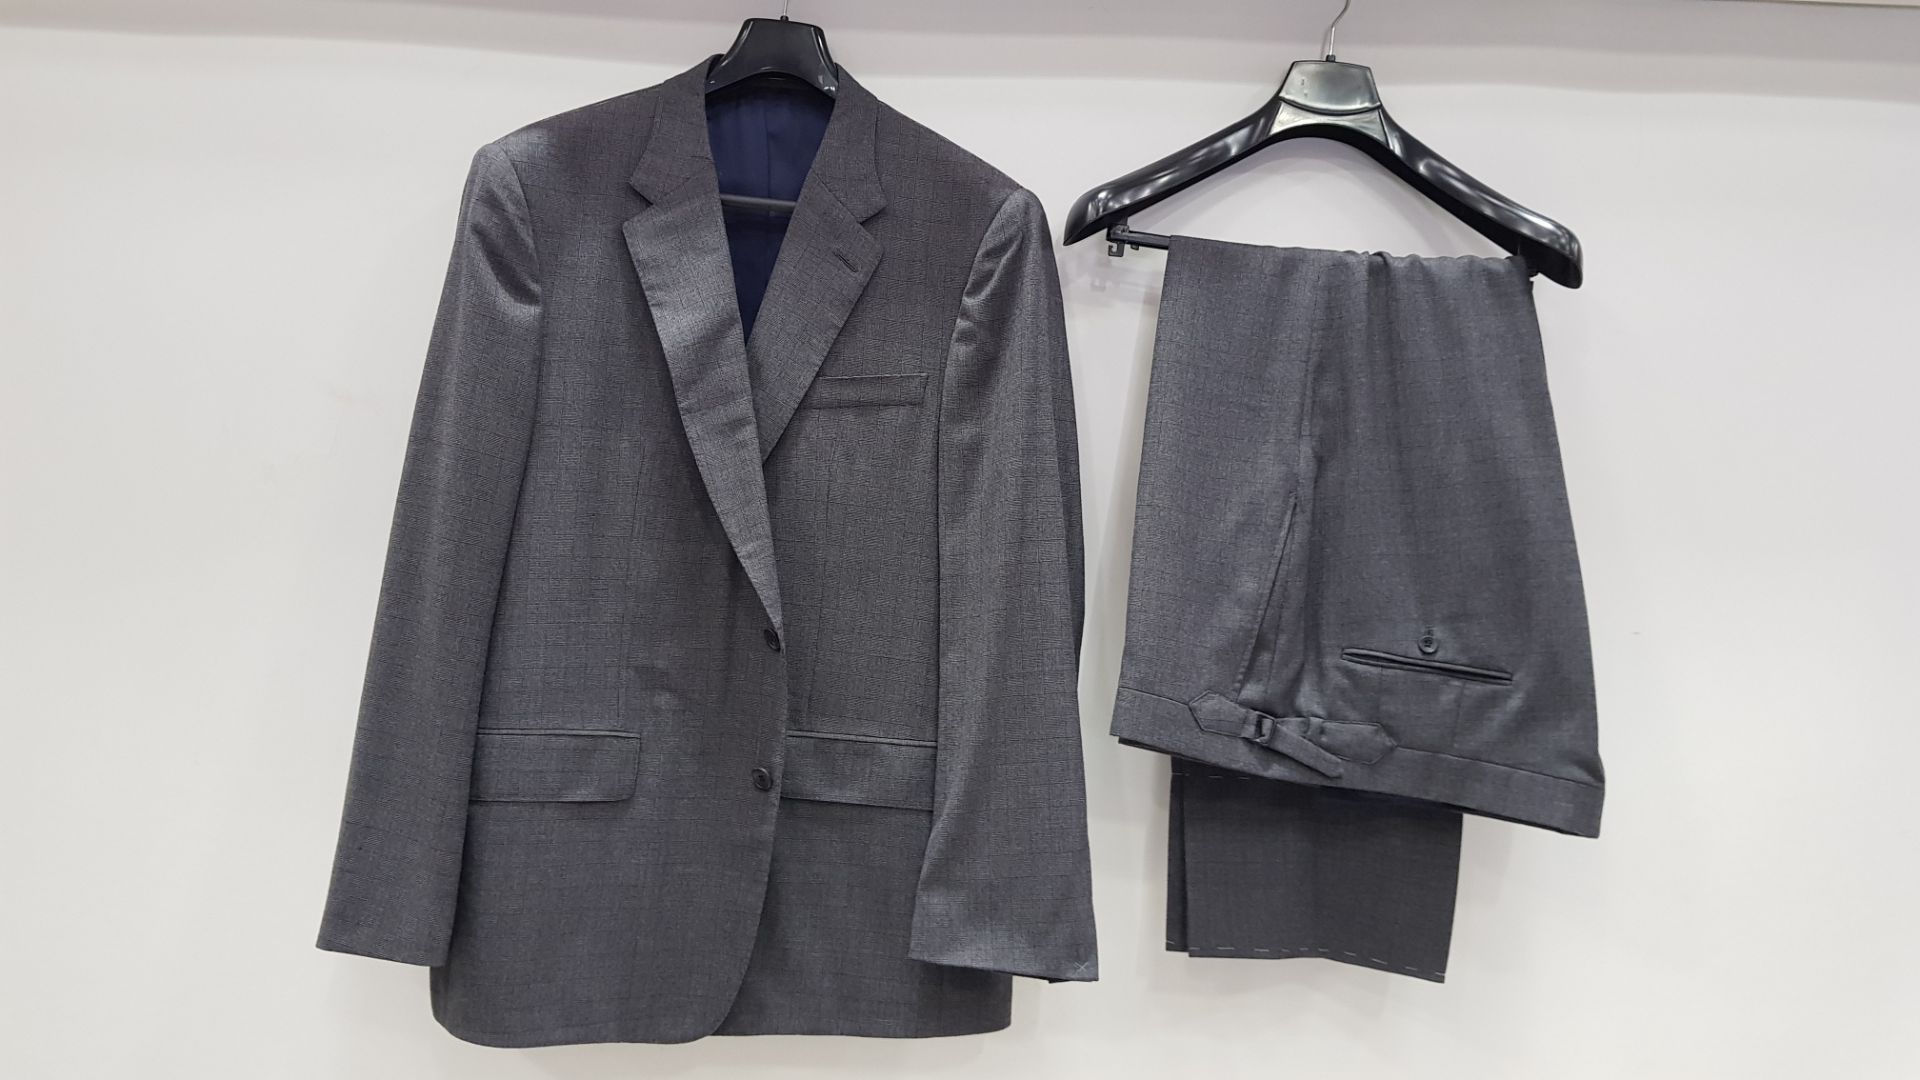 3 X BRAND NEW LUTWYCHE HAND TAILORED GREY PATTERNED SUITS (SIZES 38R,38R,50R) (PLEASE NOTE SUITS ARE